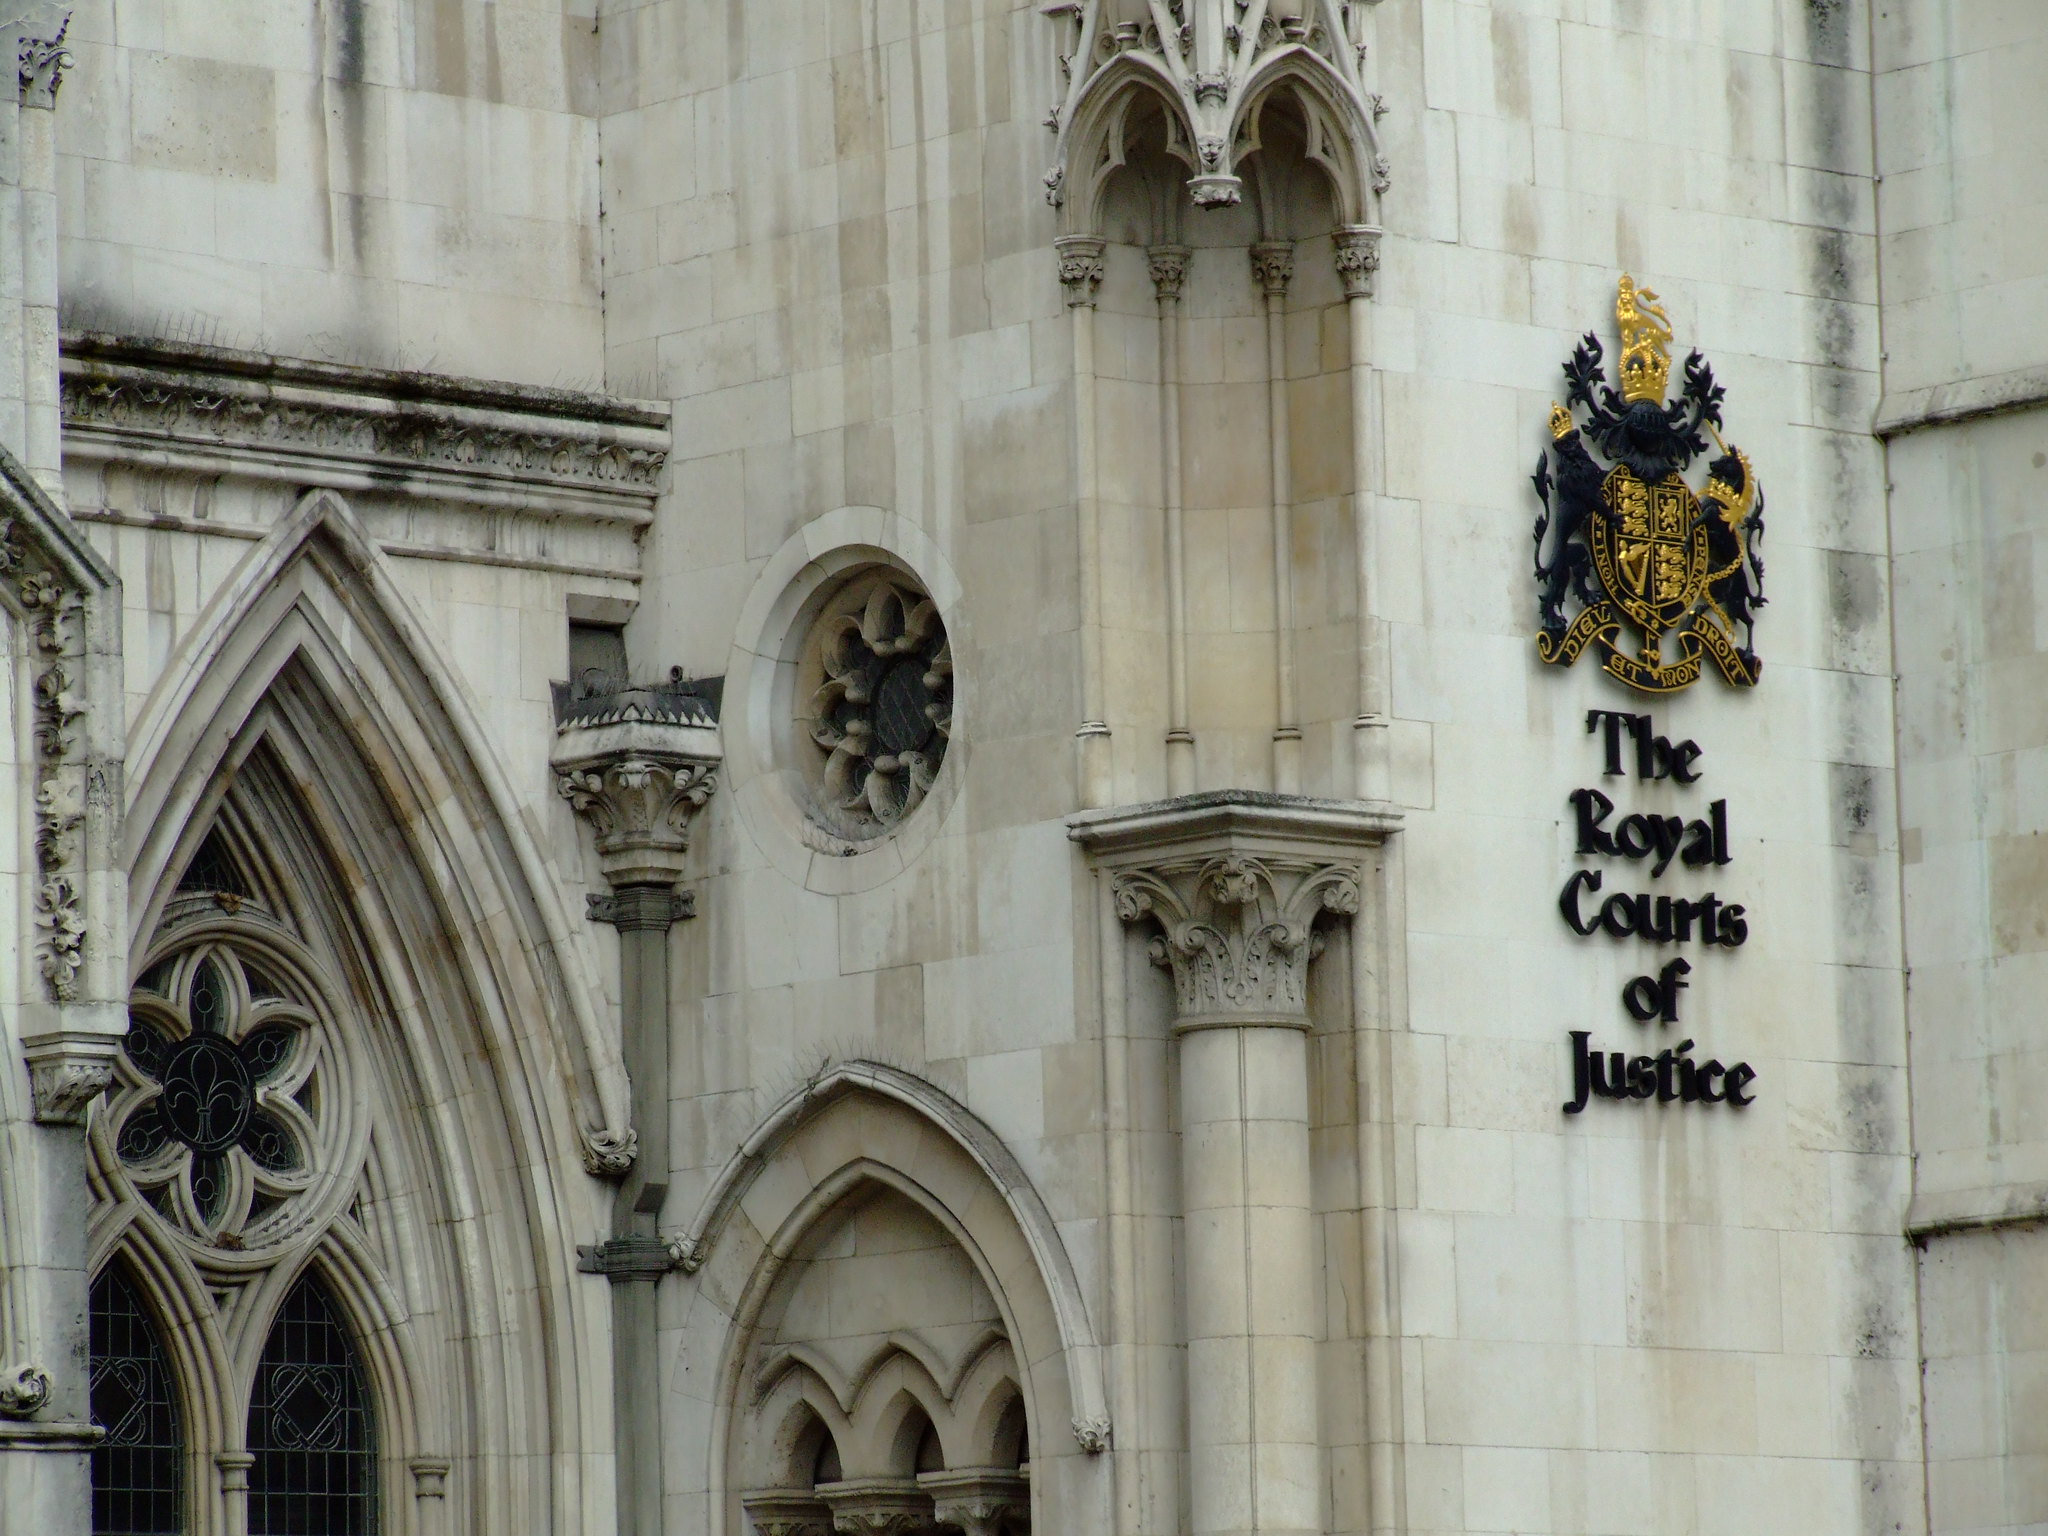 The royal courts of justice sign